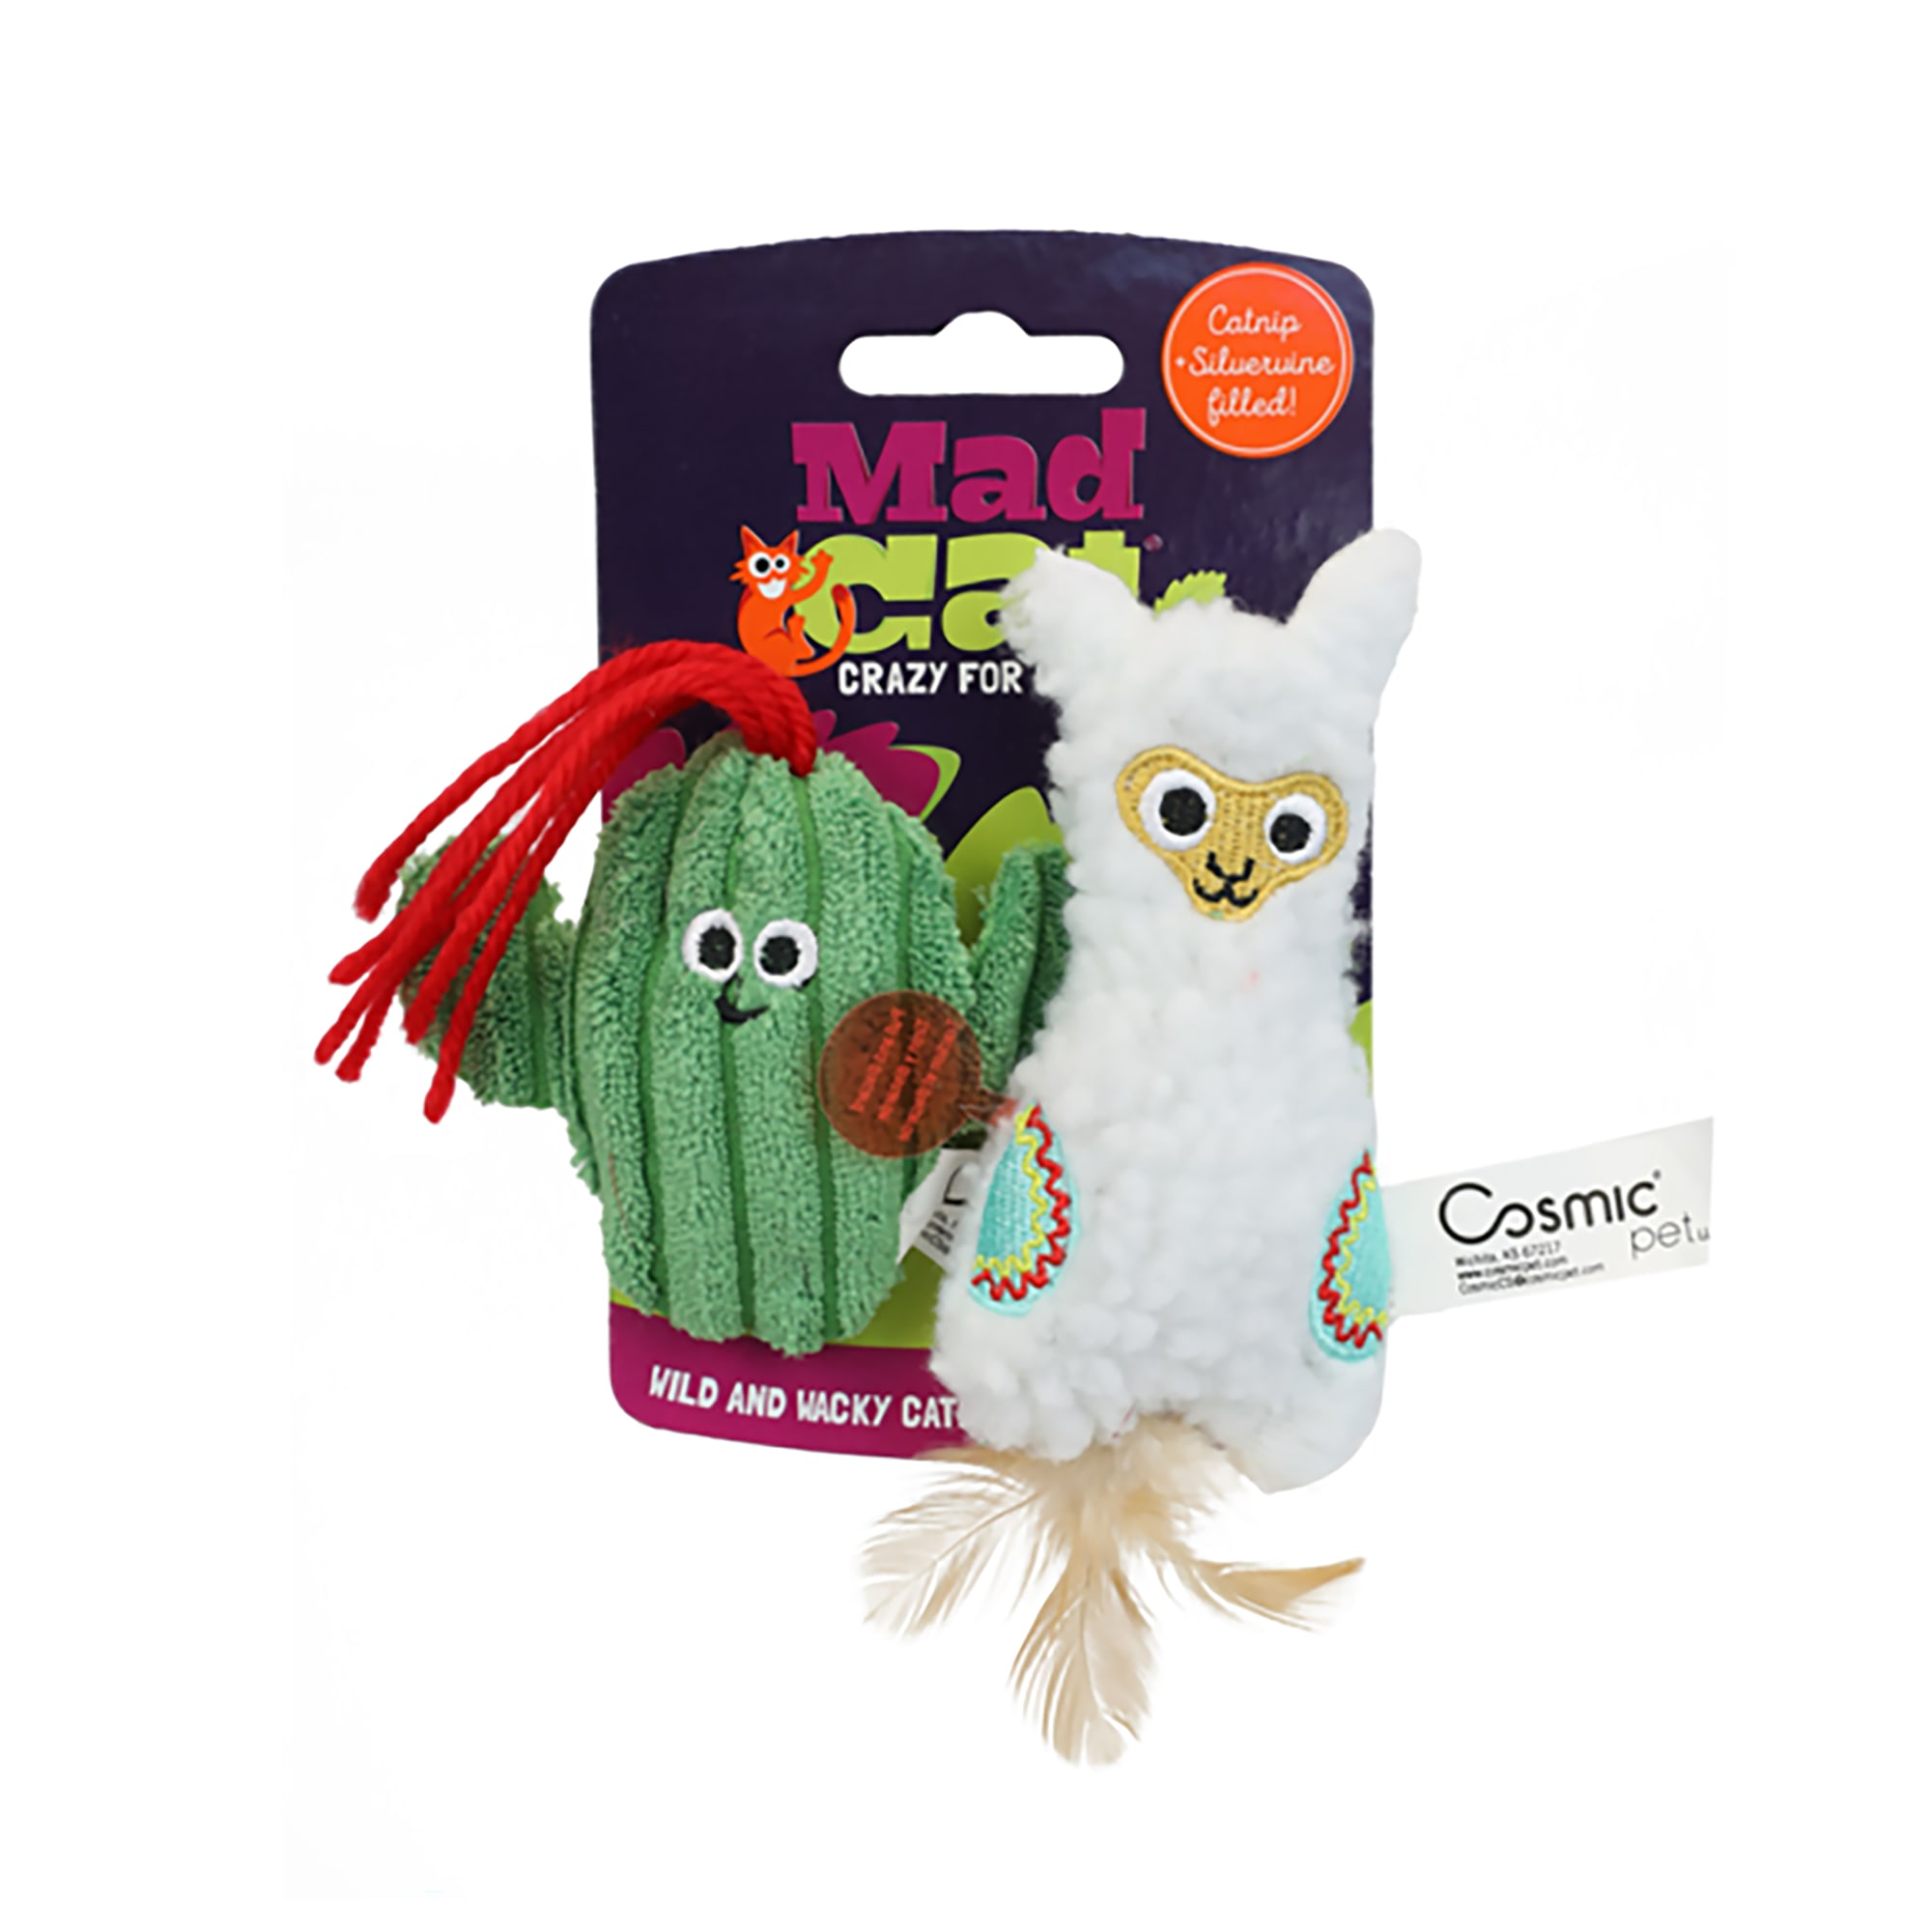 Mad Cat Lucky Llama Cat Toy, Pack of 2 Petco